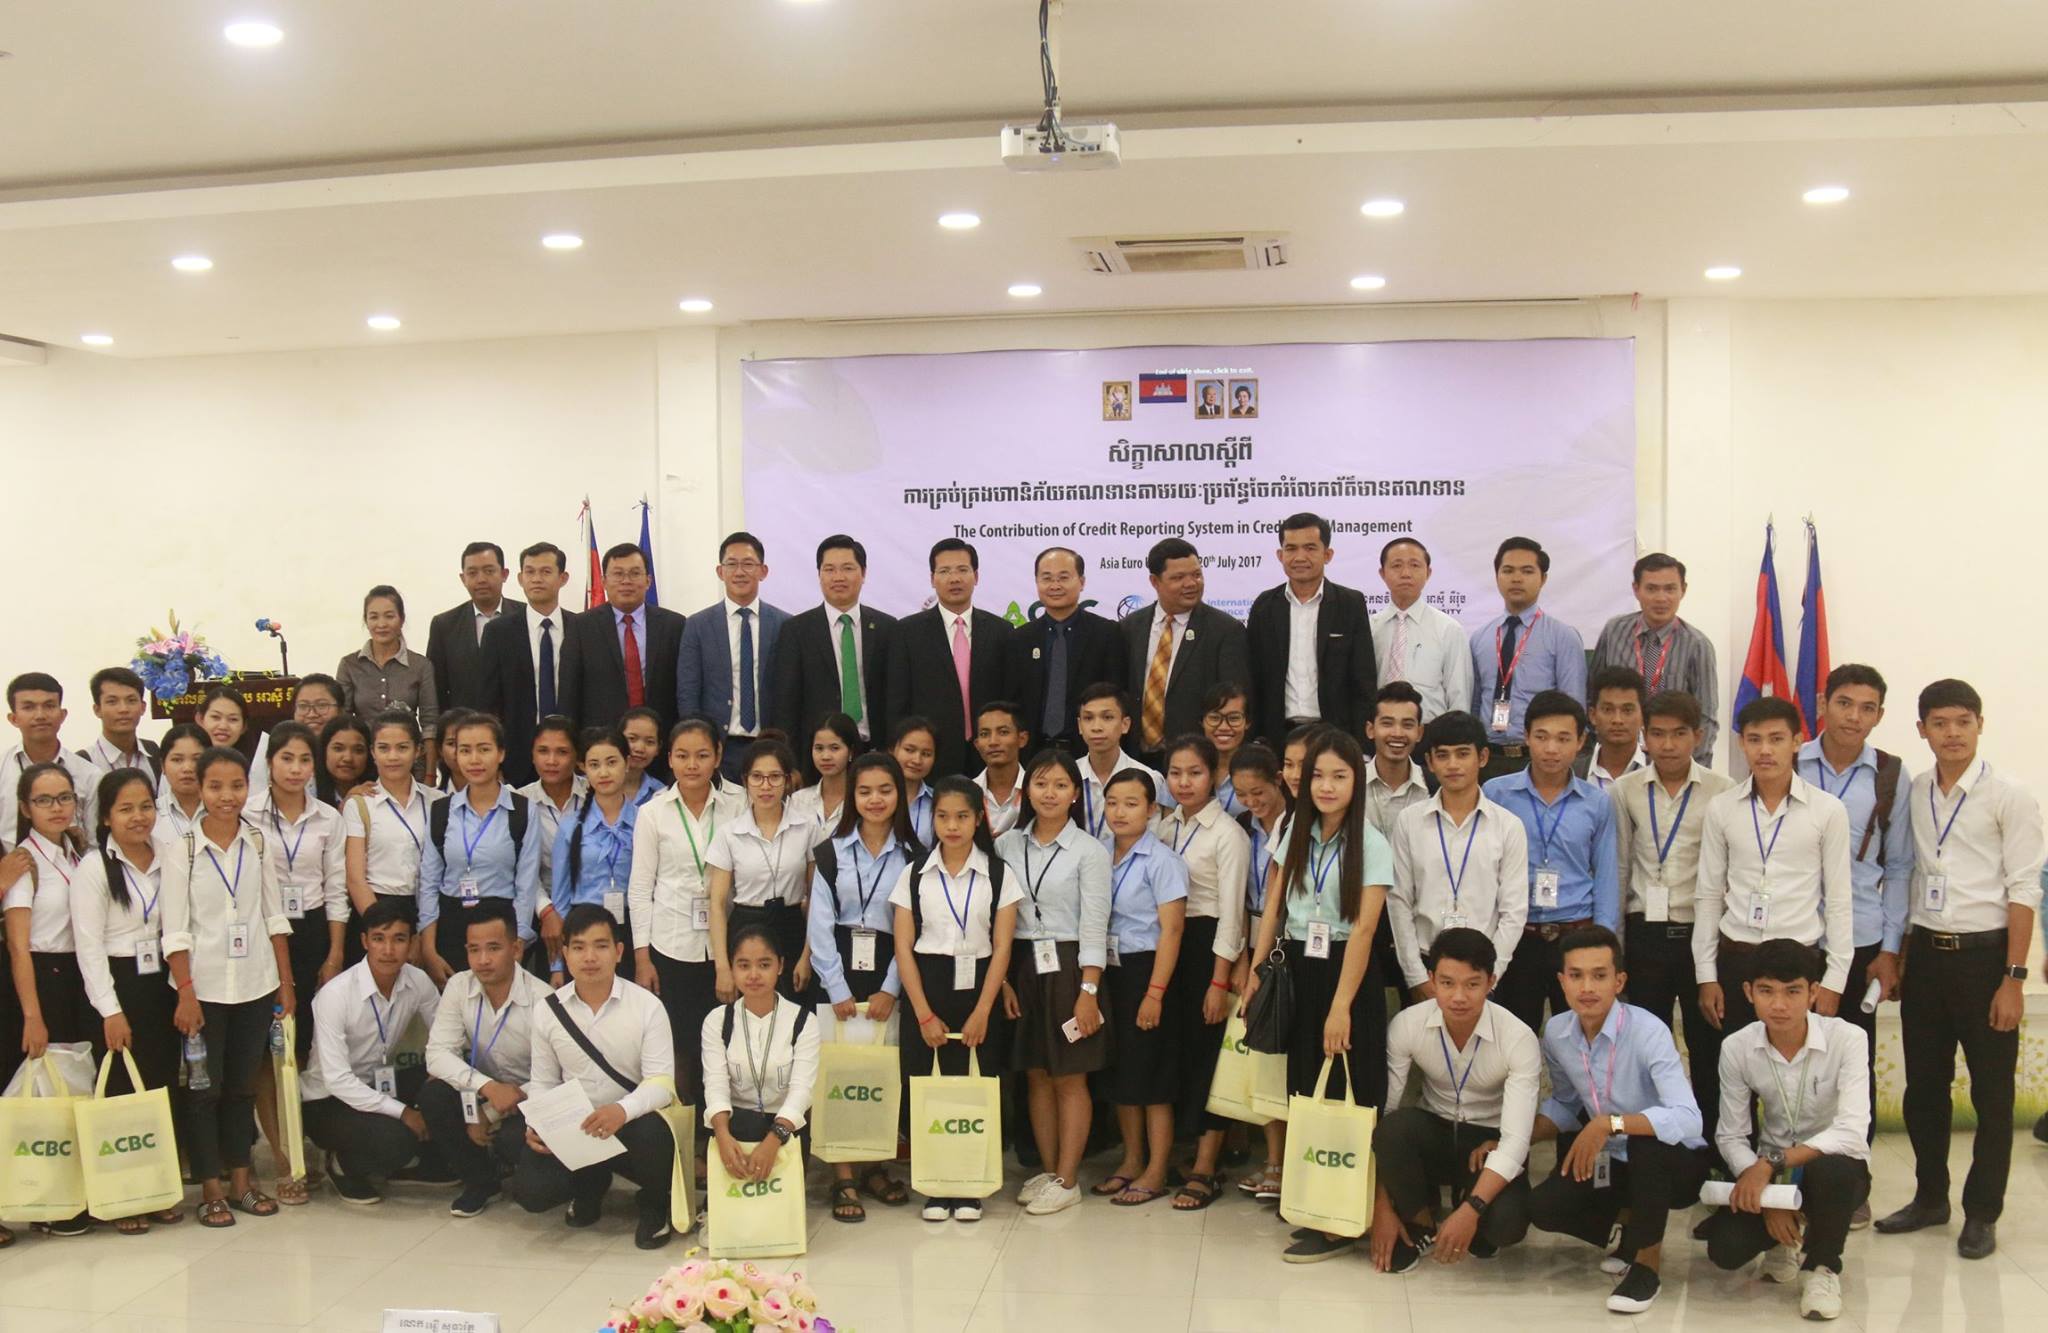 Workshop on ” The Contribution of Credit Reporting System in Credit Risk Management”